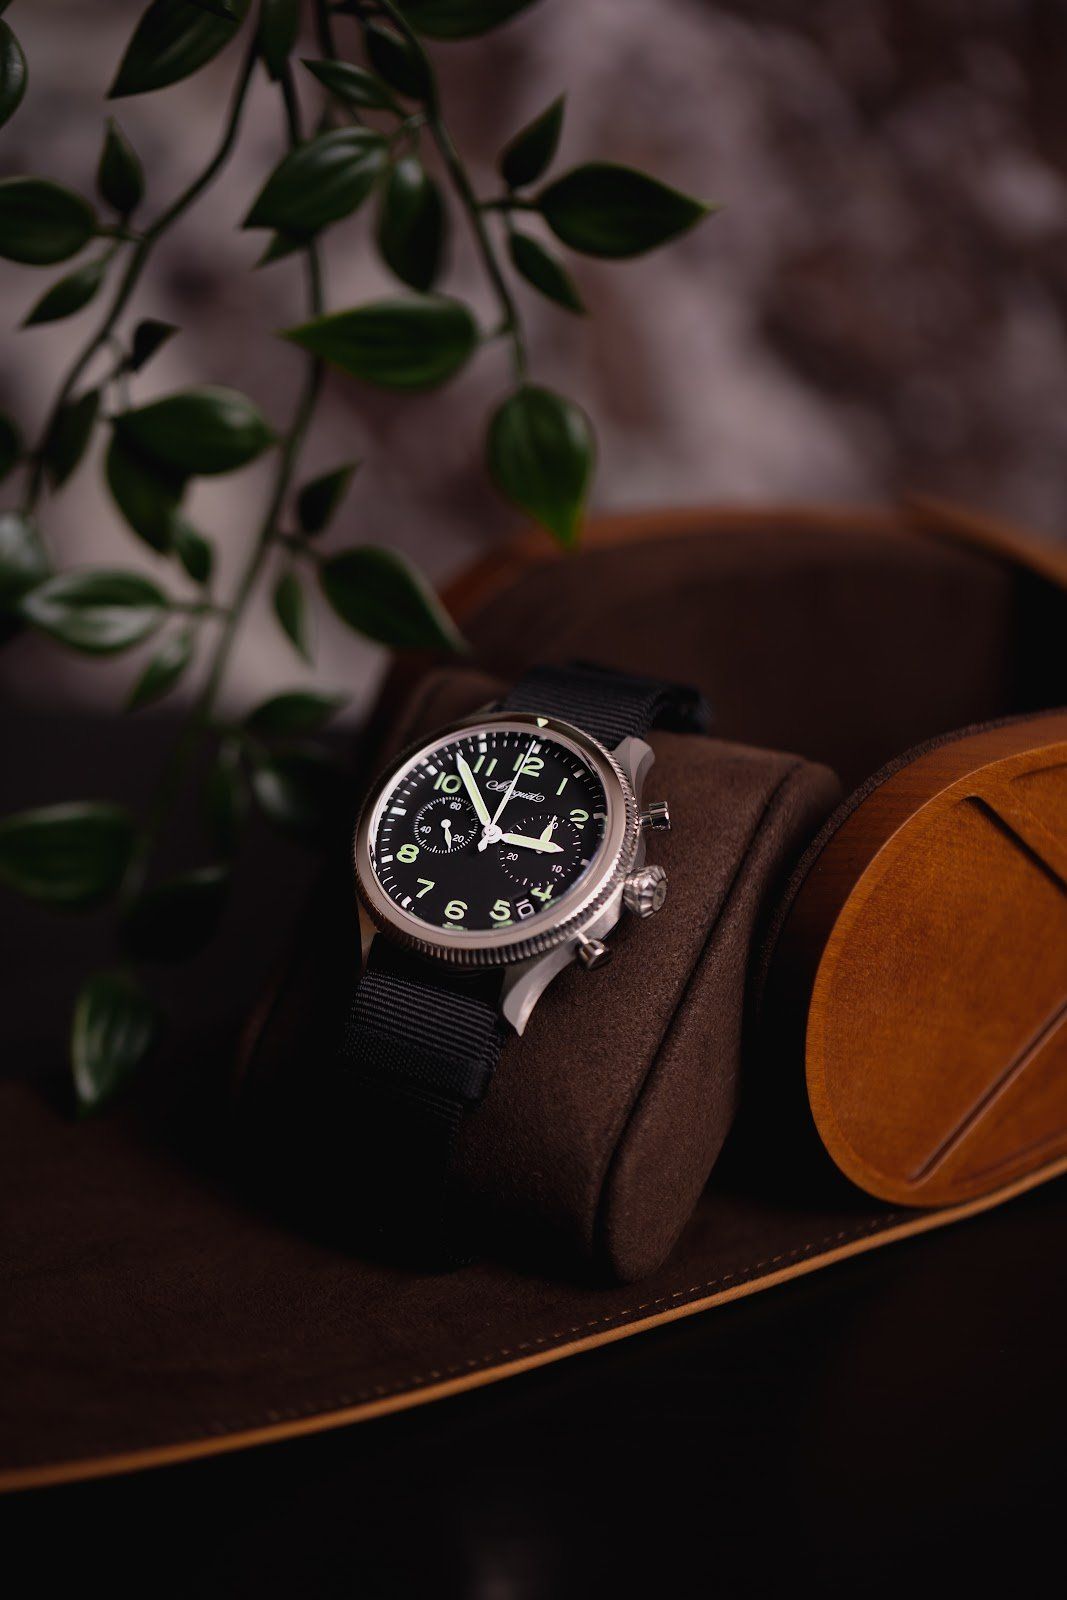 The modernized black dial still reflects the essence of the Type 20 identity